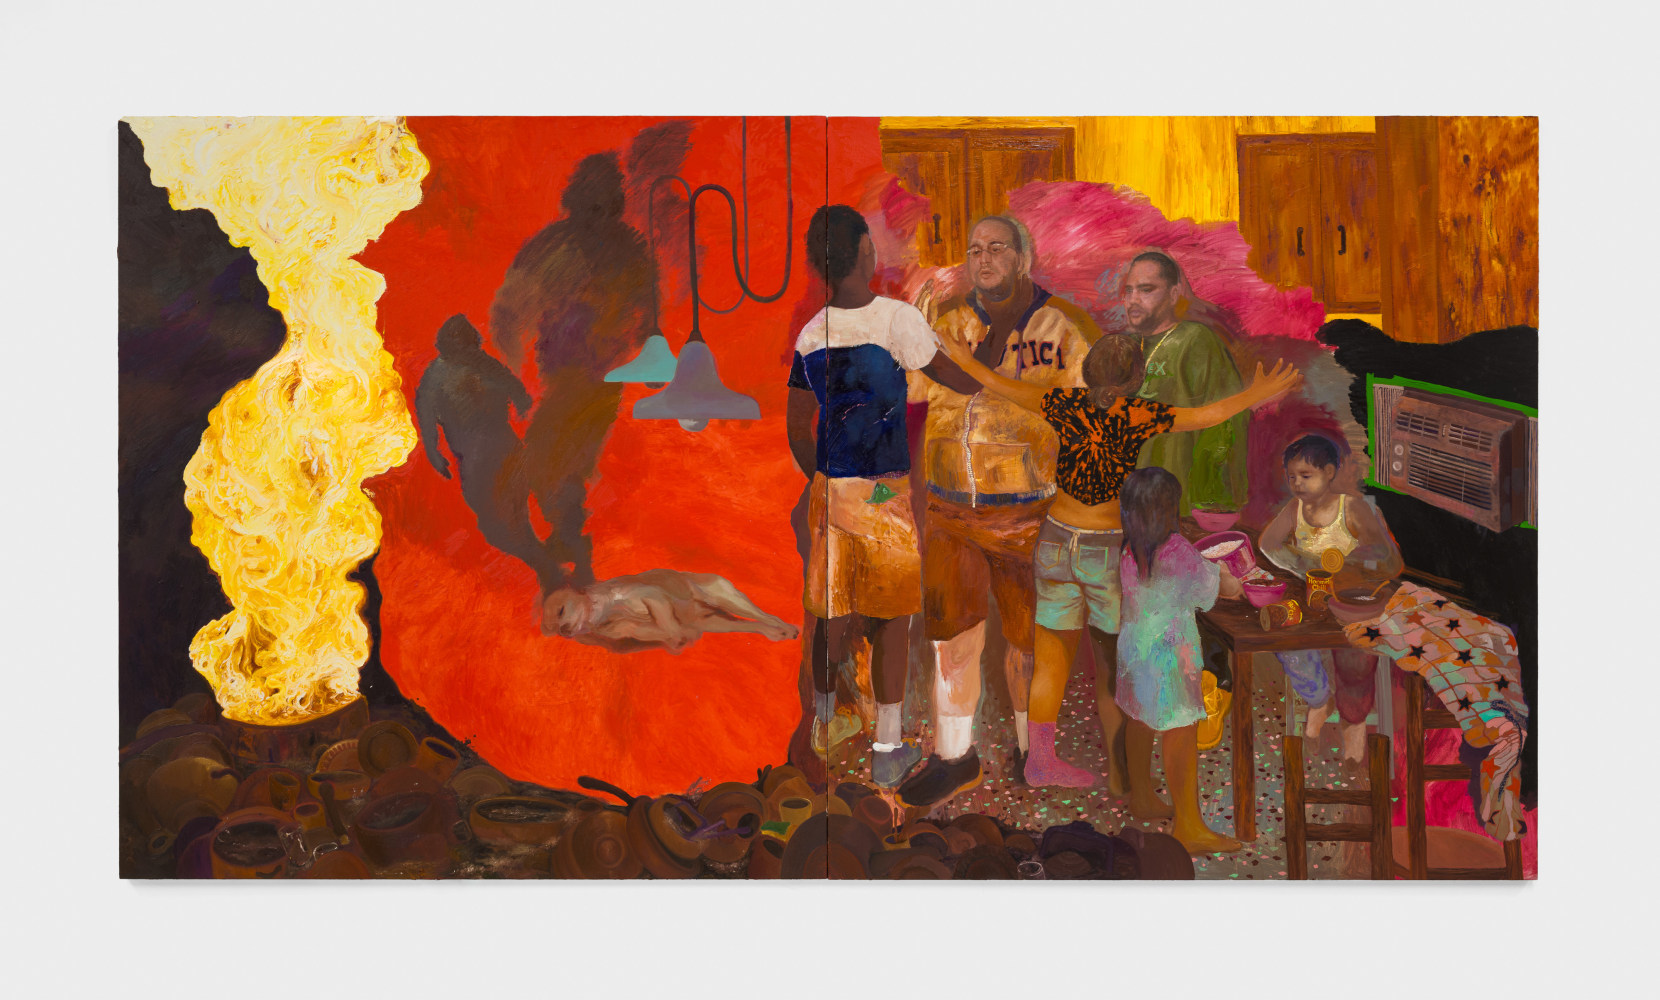 A two panel painting of a family scene inside their home with a burst of flame and ghostly figures emerging from a red space within the home.